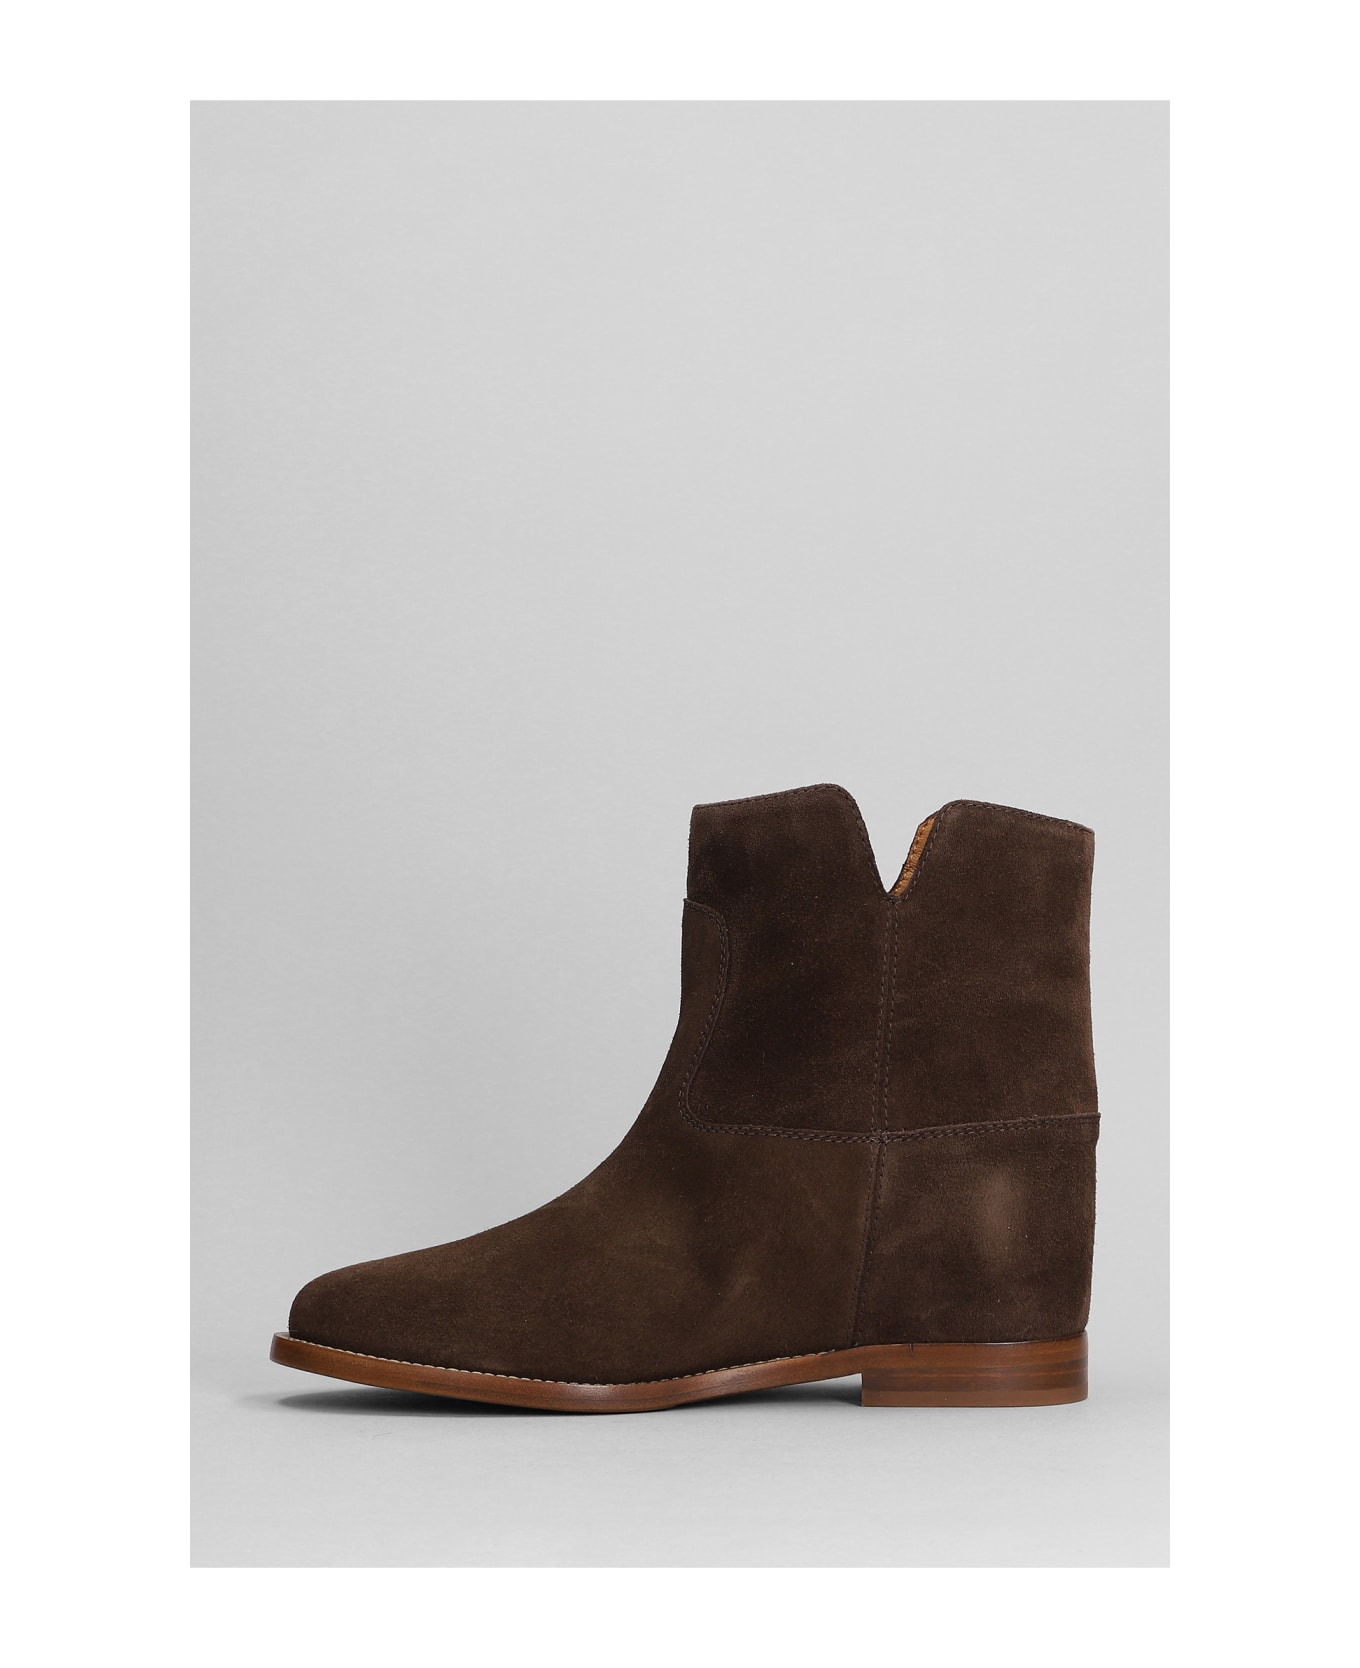 Via Roma 15 Ankle Boots Inside Wedge In Brown Suede - brown ブーツ